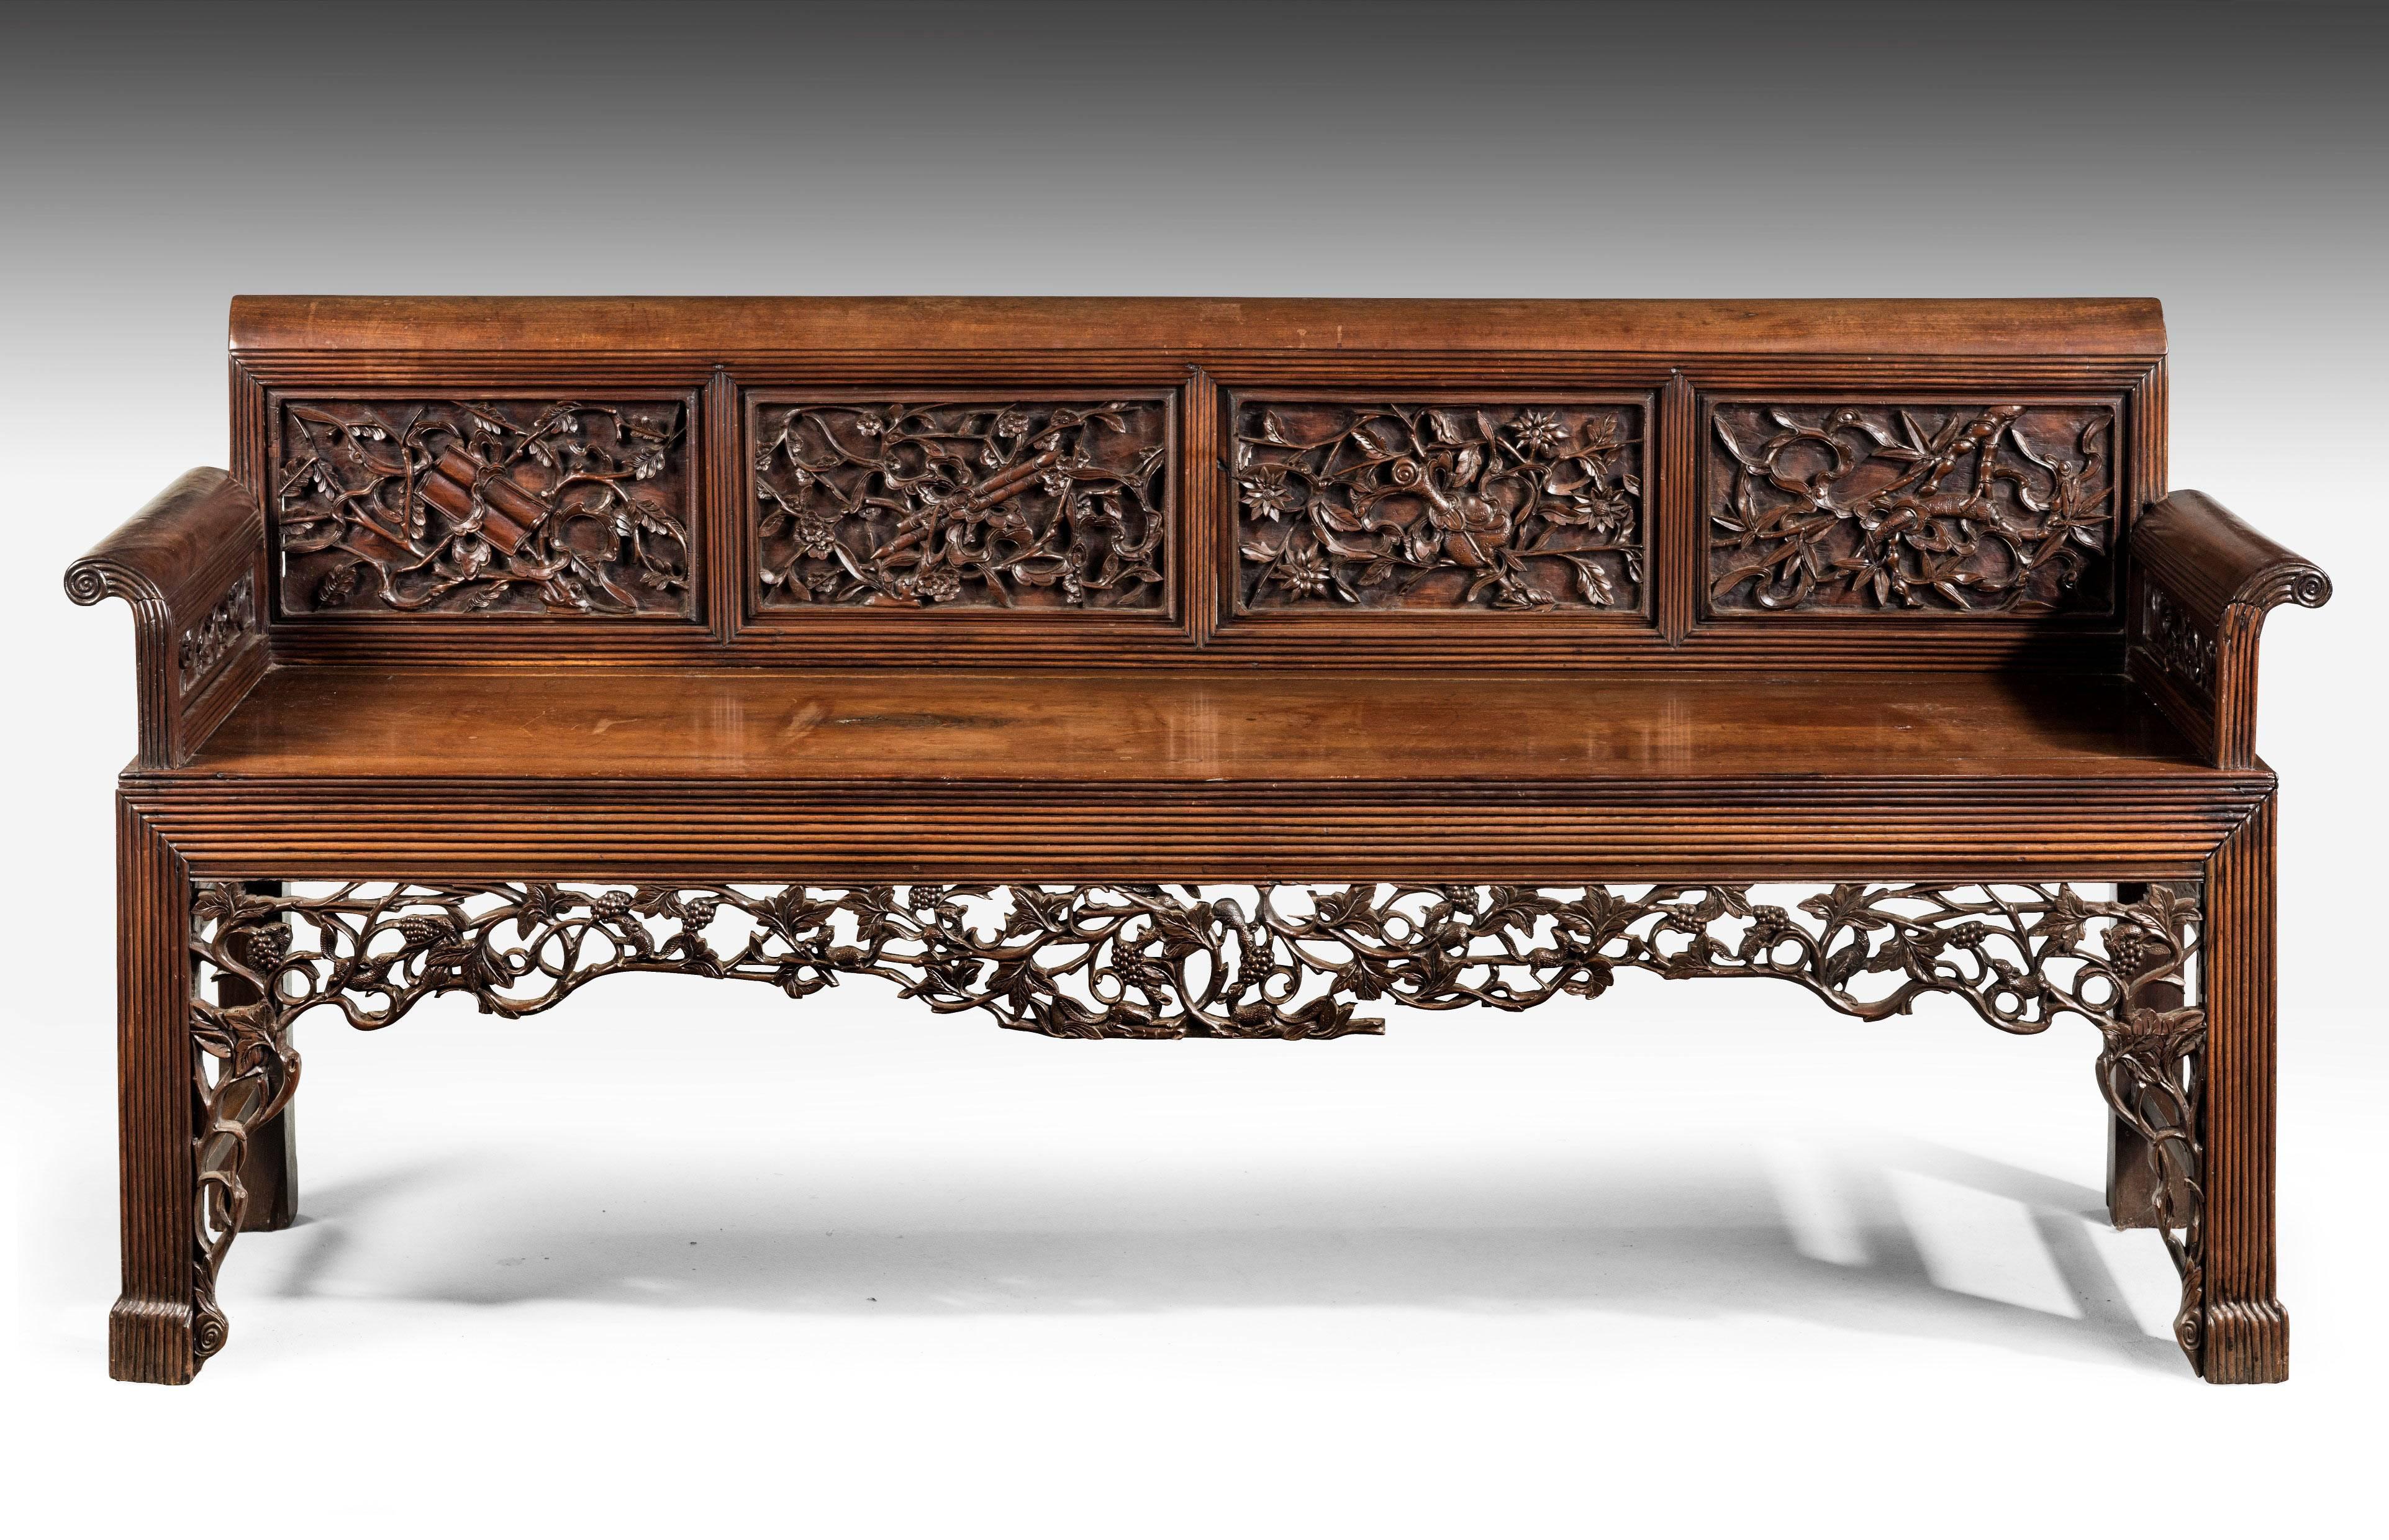 A fine and rare mid-19th century Chinese hardwood sofa with beautifully carved and finely executed details. Excellent overall condition.